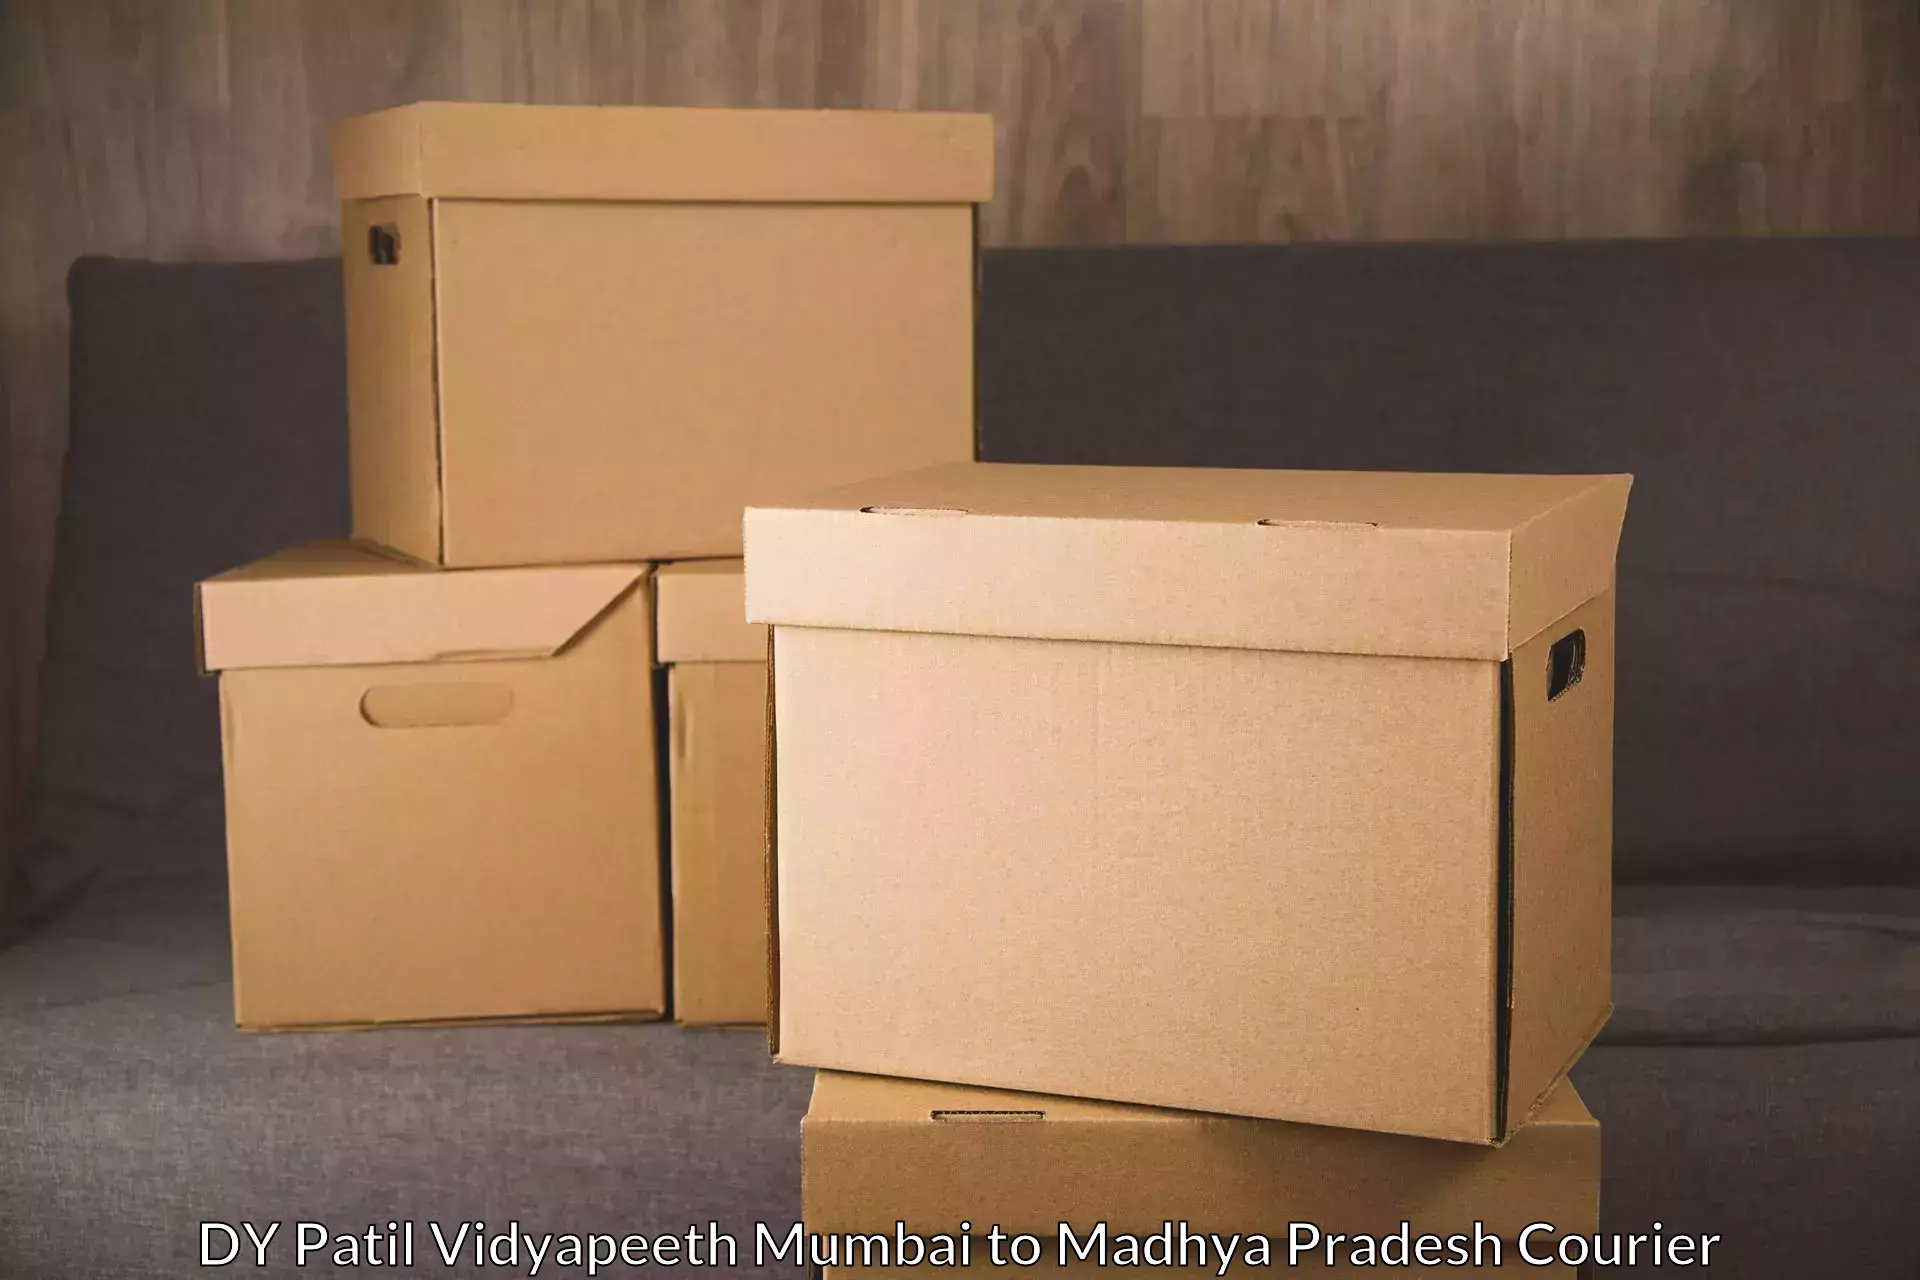 Subscription-based courier DY Patil Vidyapeeth Mumbai to Pithampur